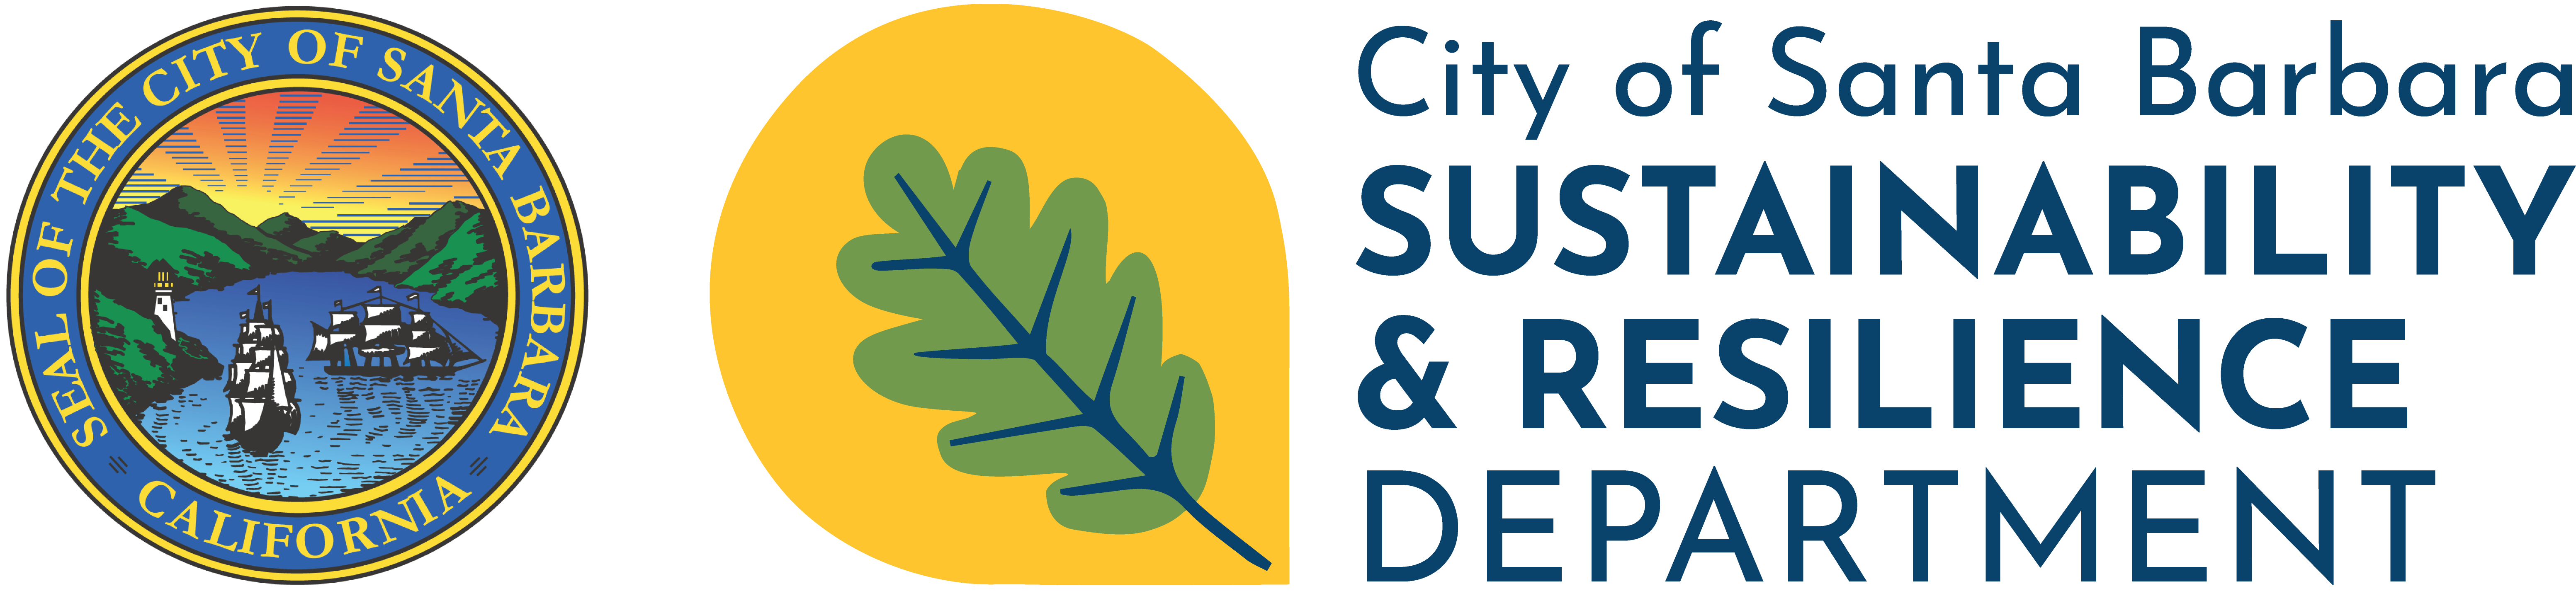 City of Santa Barbara Sustainability and Resilience Department